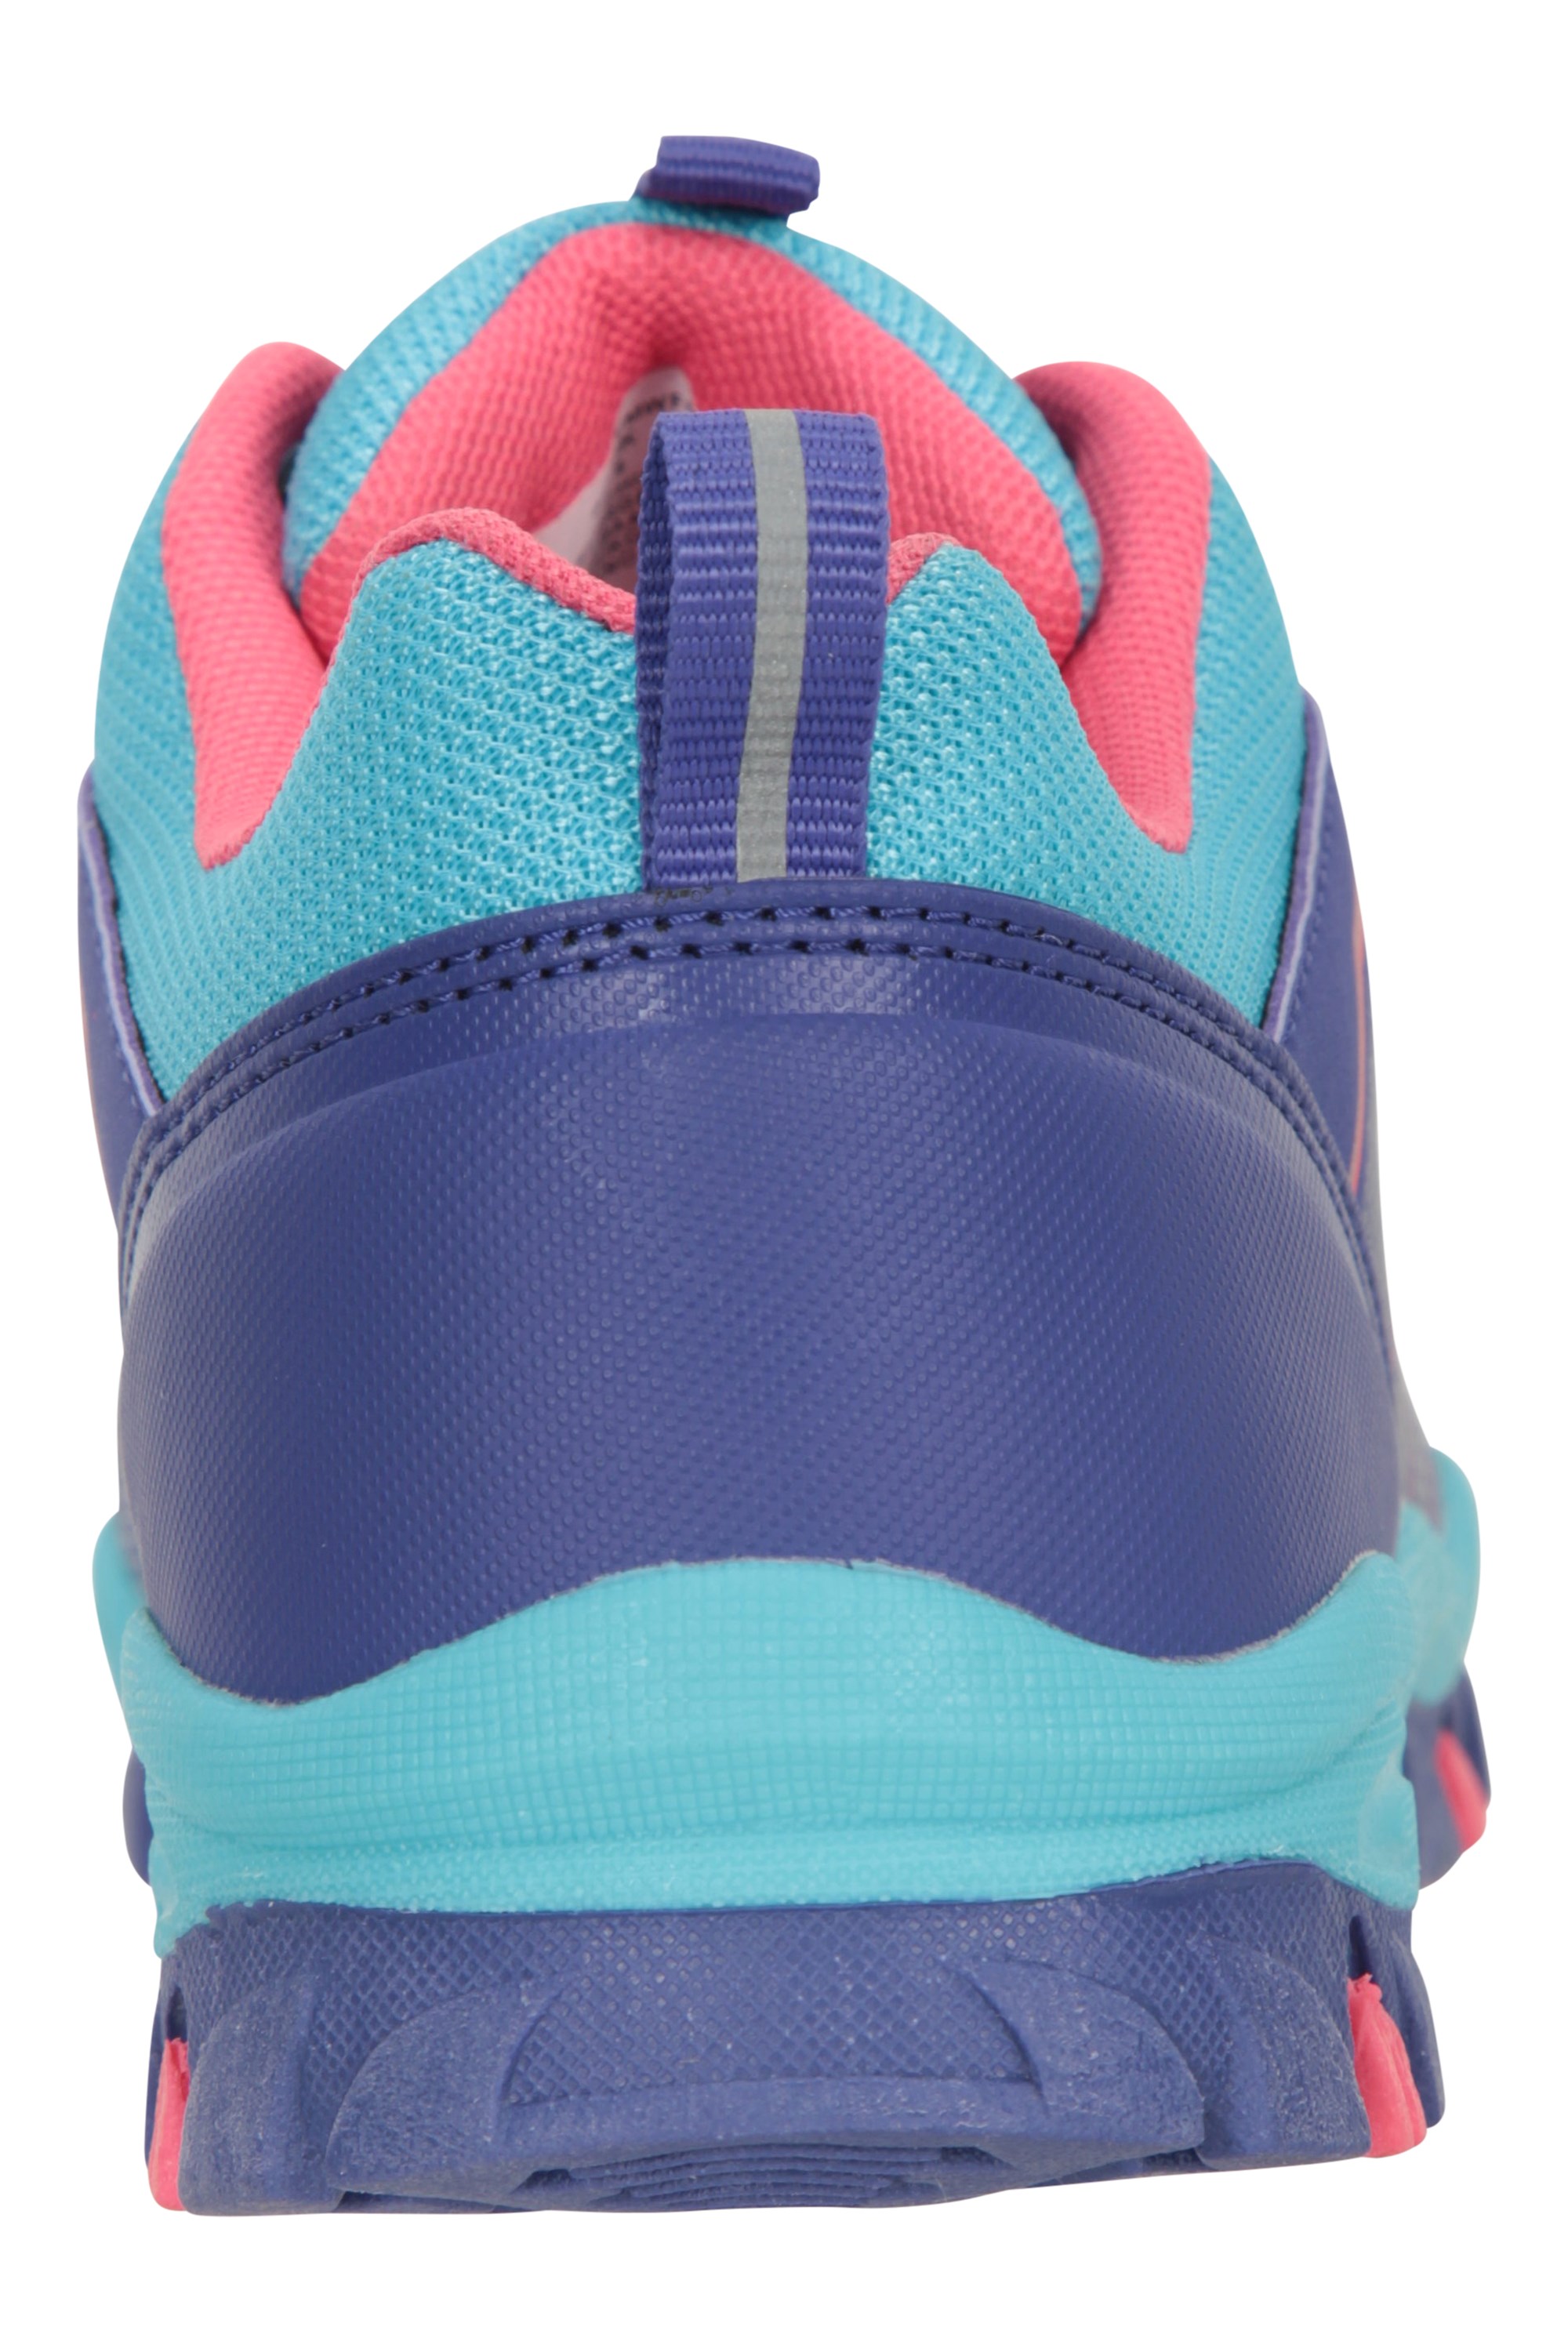 Bolt Kids Active Waterproof Shoes | Mountain Warehouse GB